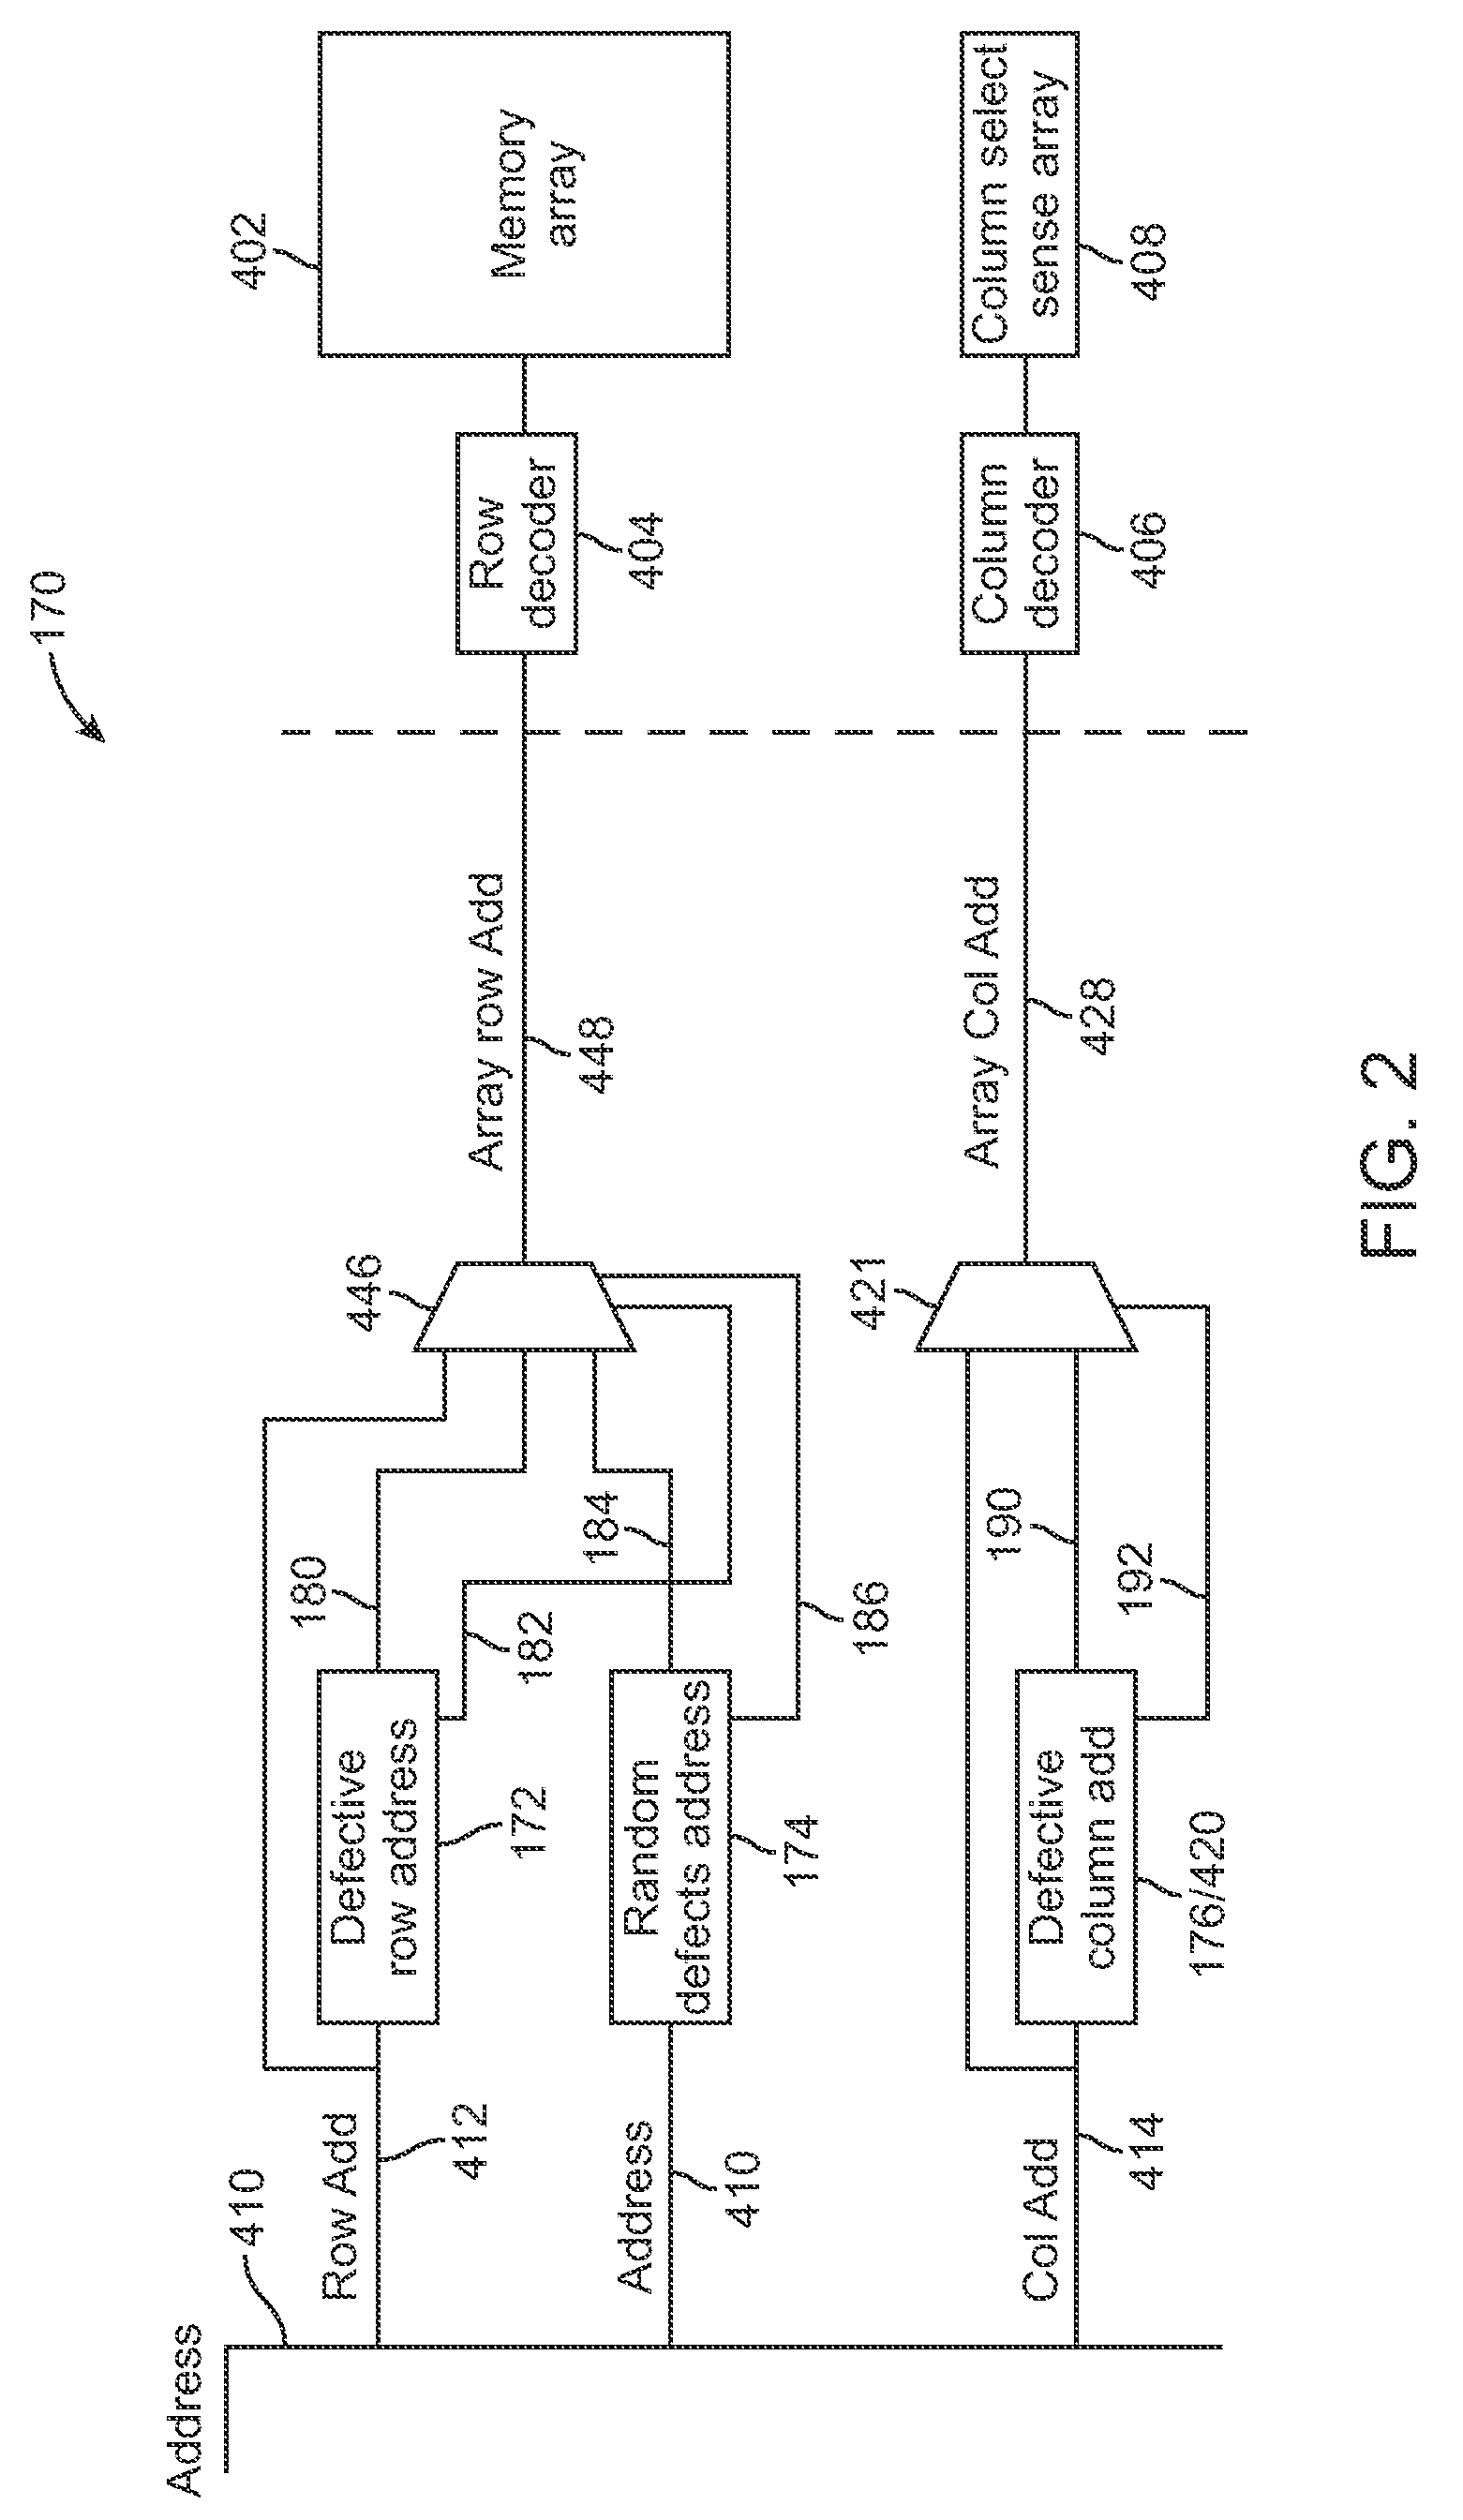 Mapping of random defects in a memory device